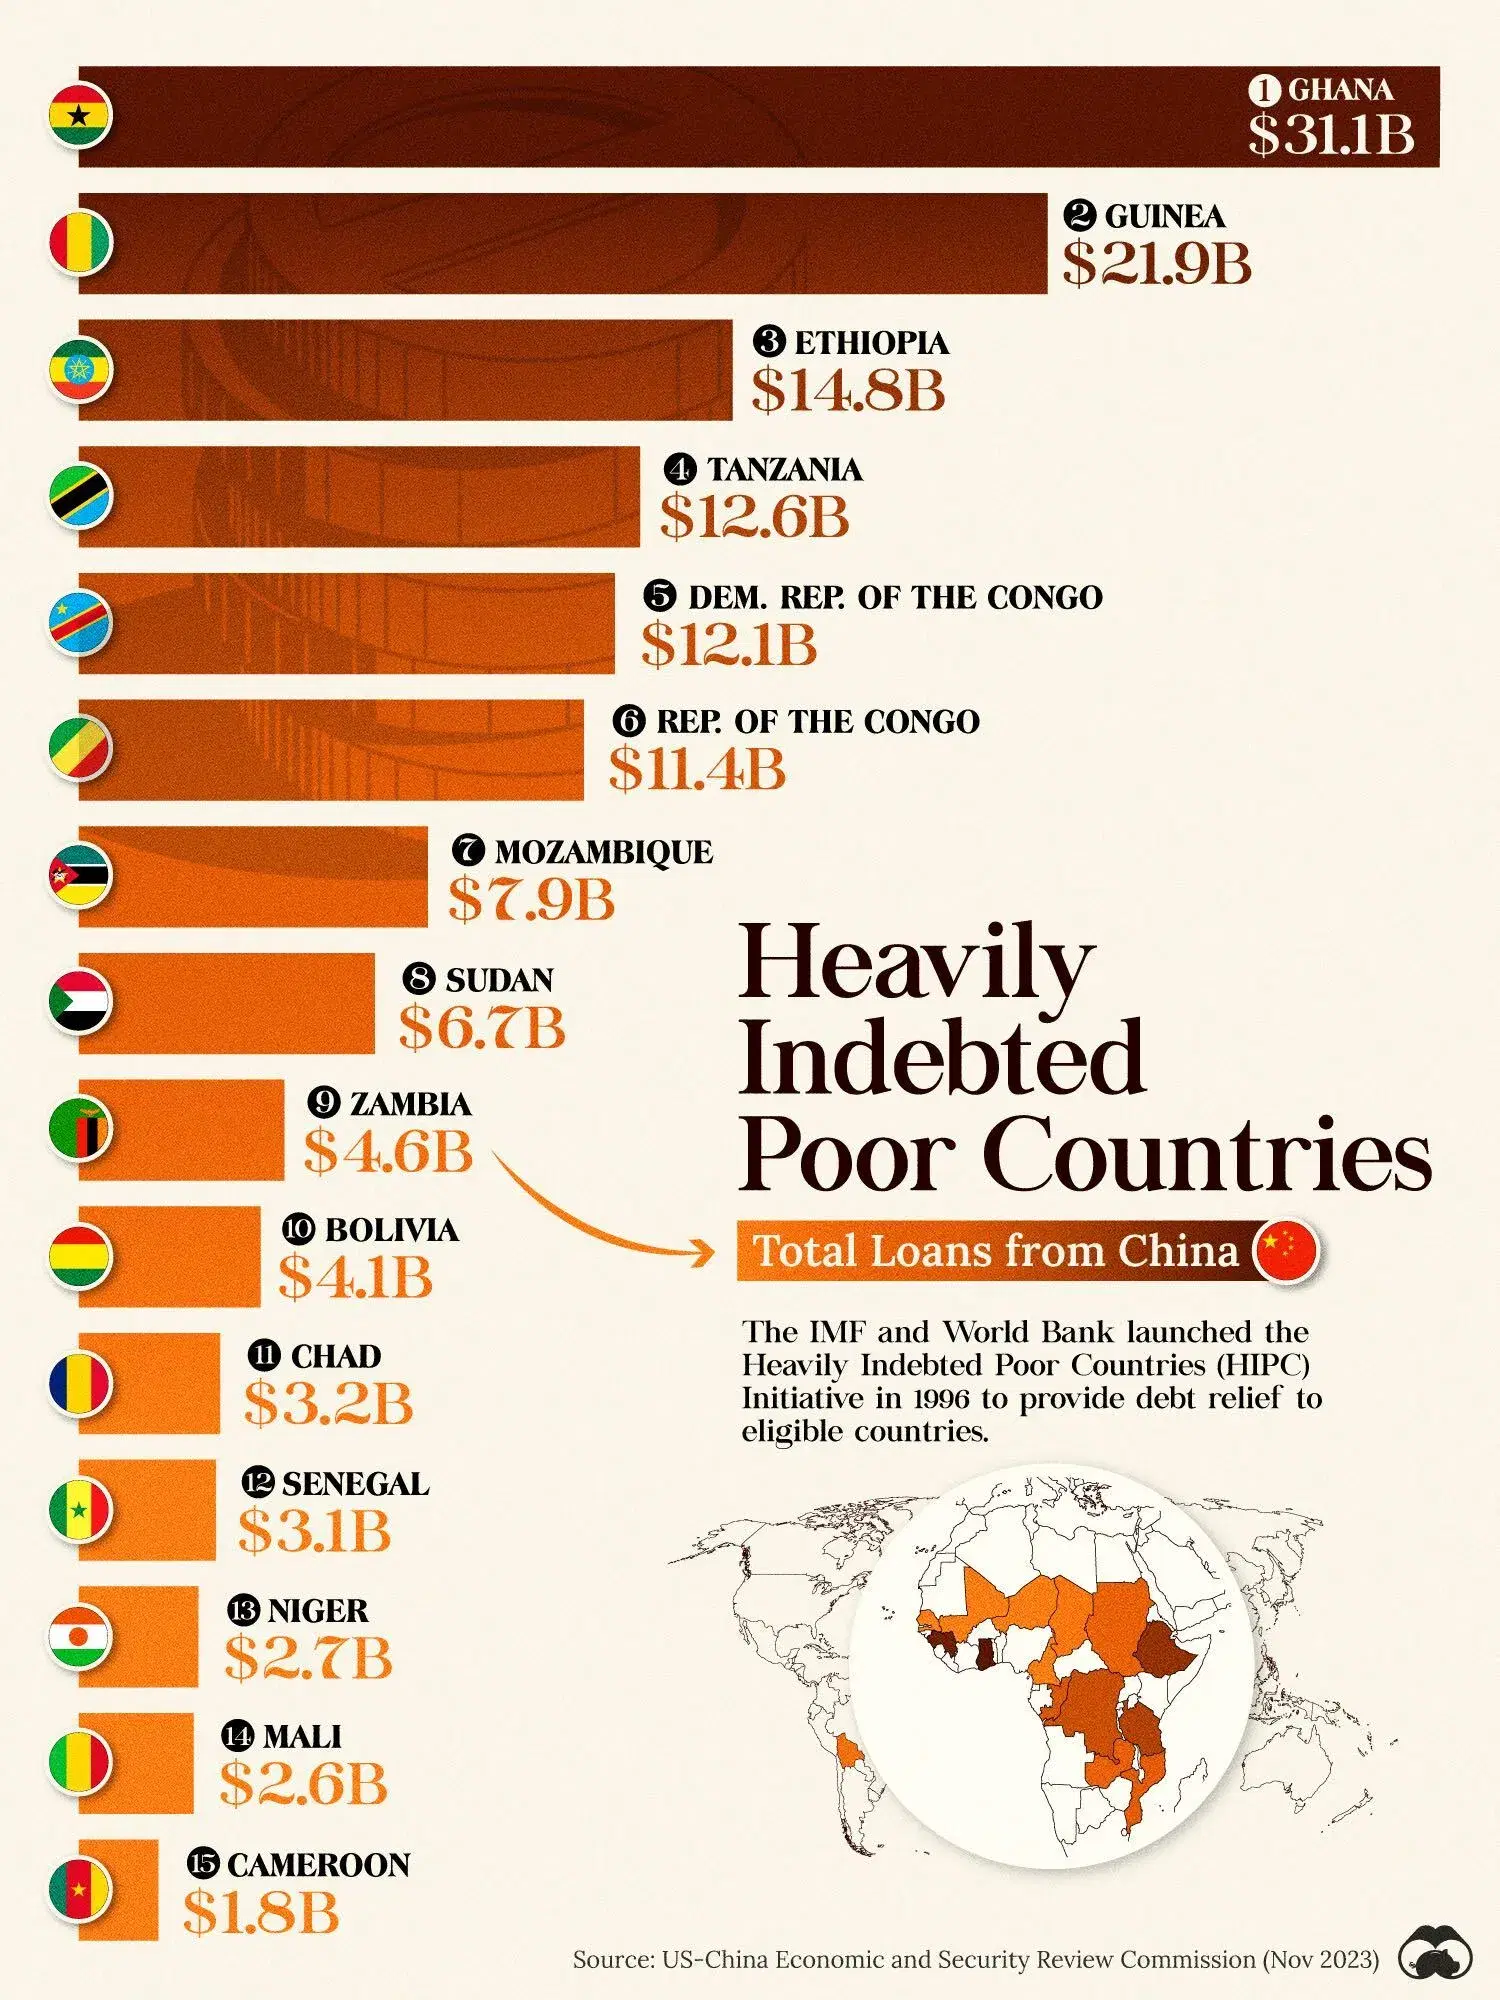 These Low Income Countries Have Received the Most Loans from China